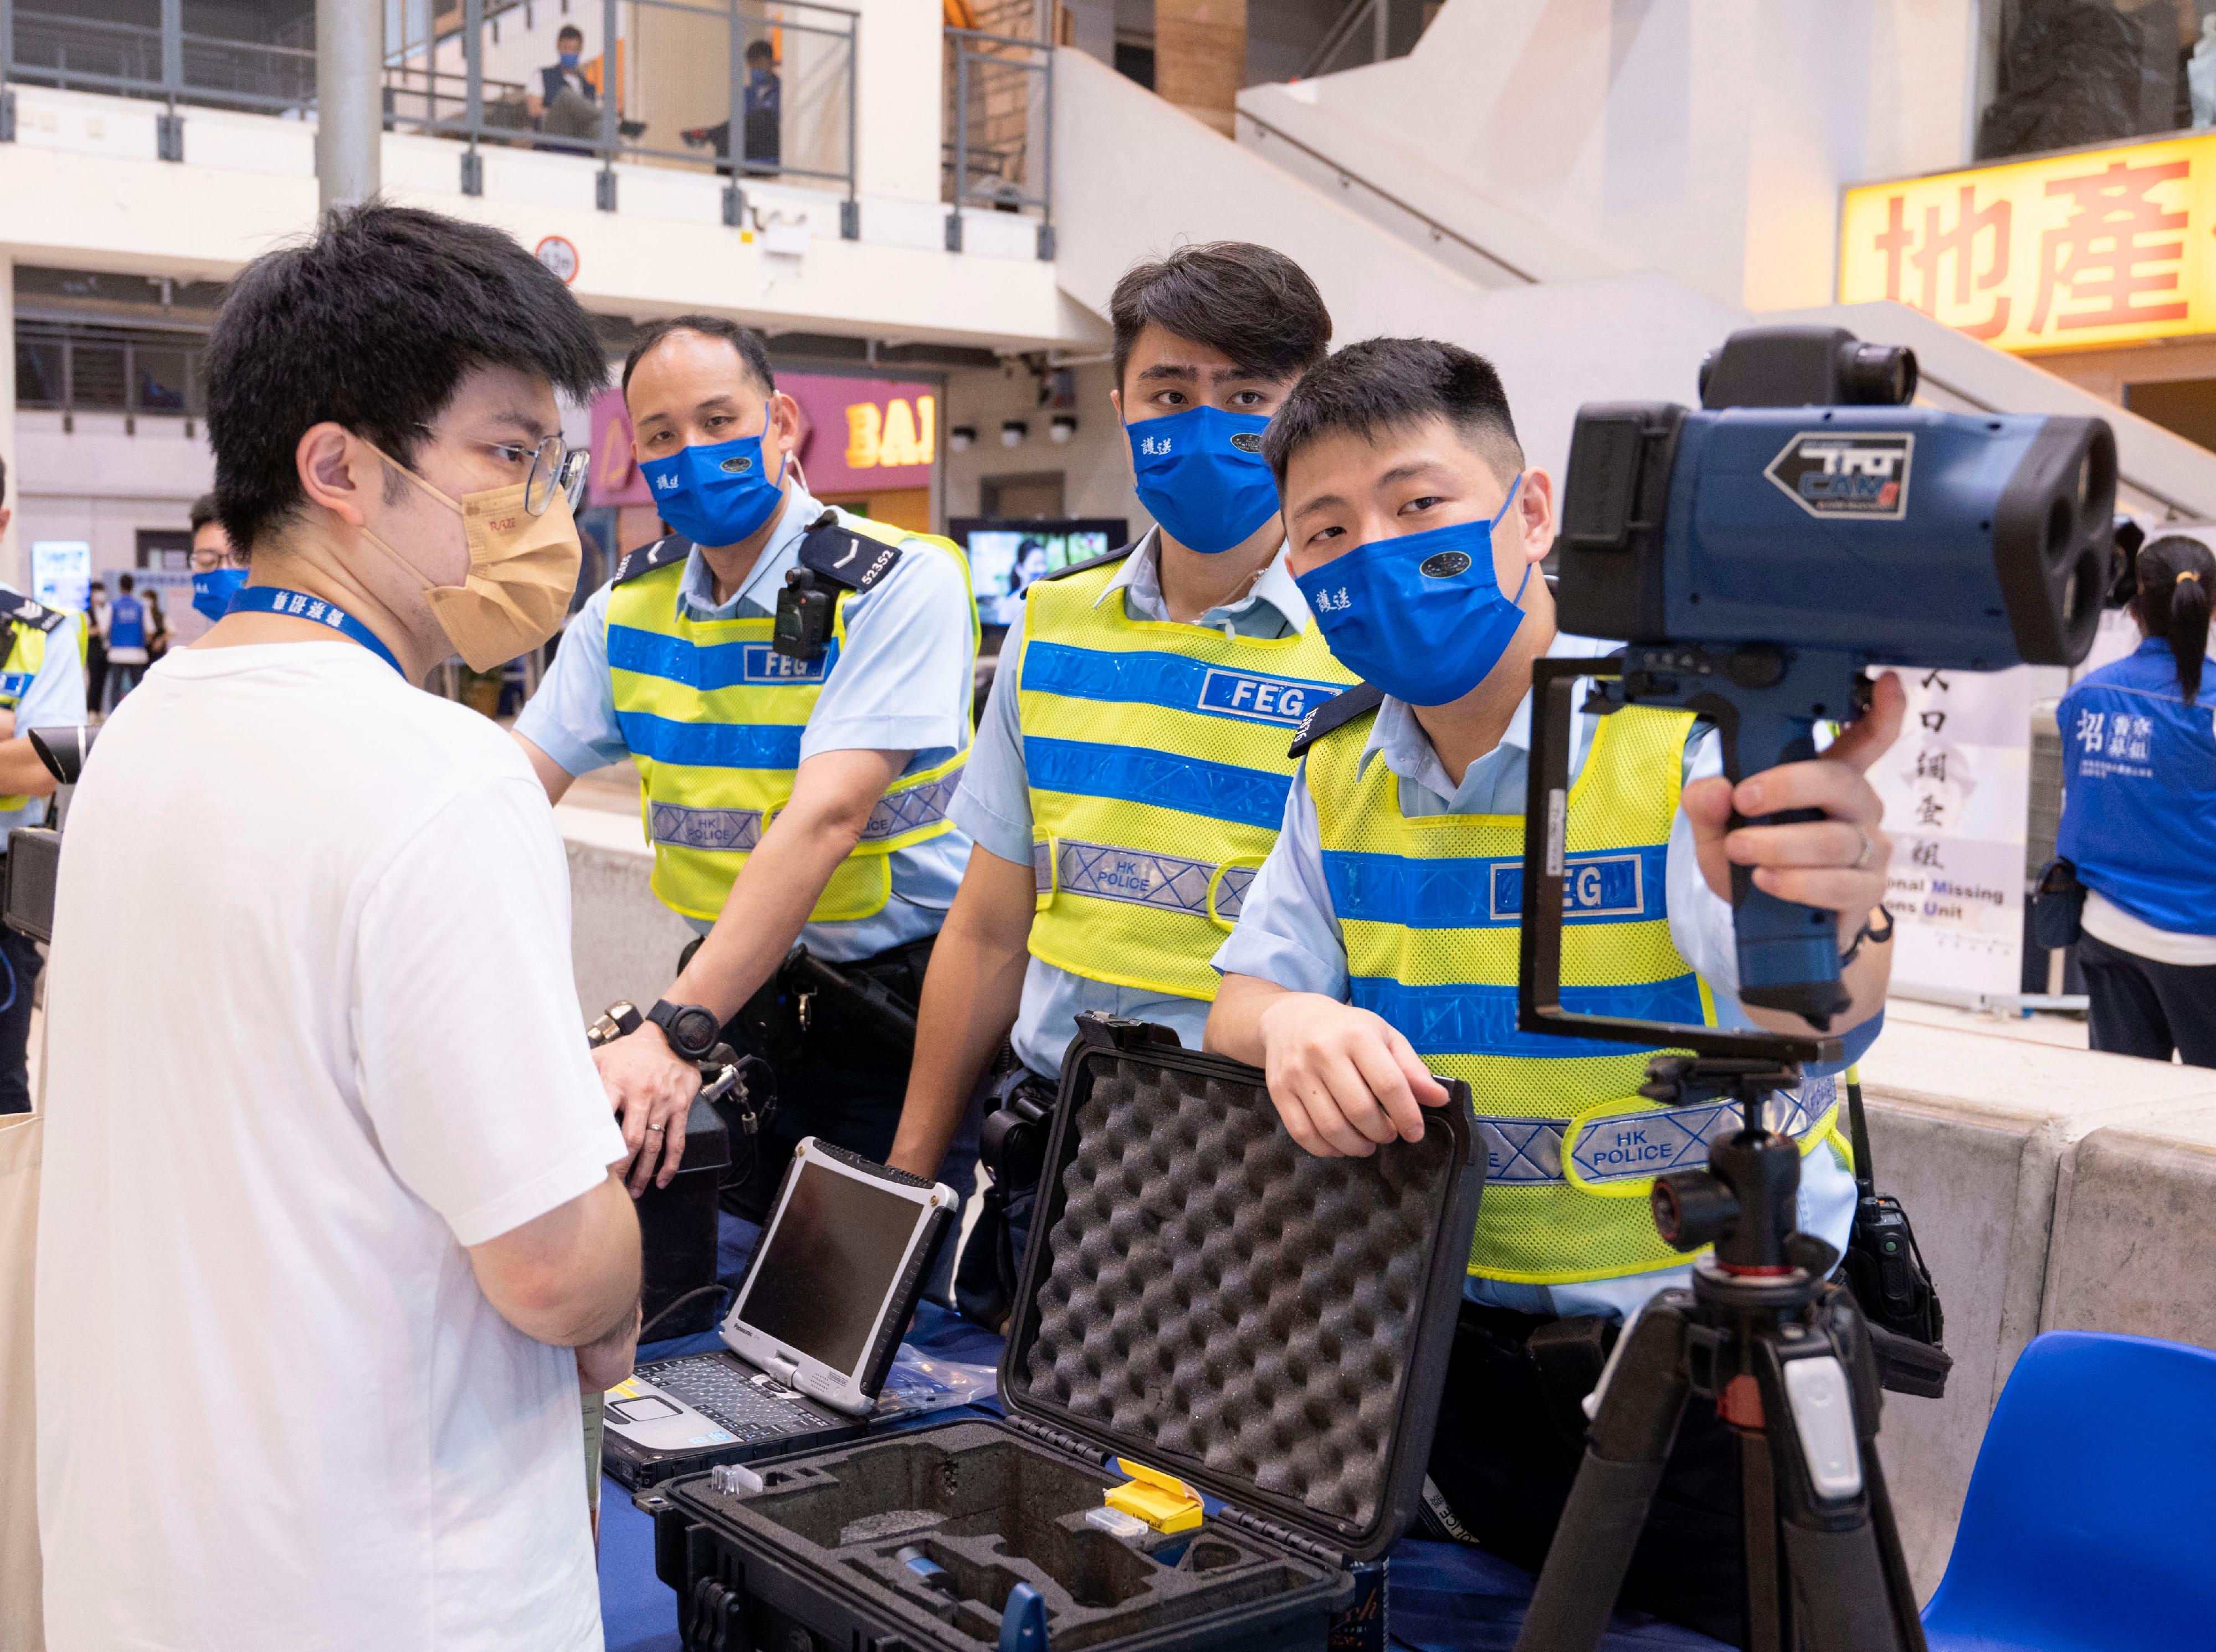 The Hong Kong Police Force today (June 19) organised the Police Recruitment Experience and Assessment Day at the Hong Kong Police College. Photo shows officers from the Force Escort Group introducing their work to participants.